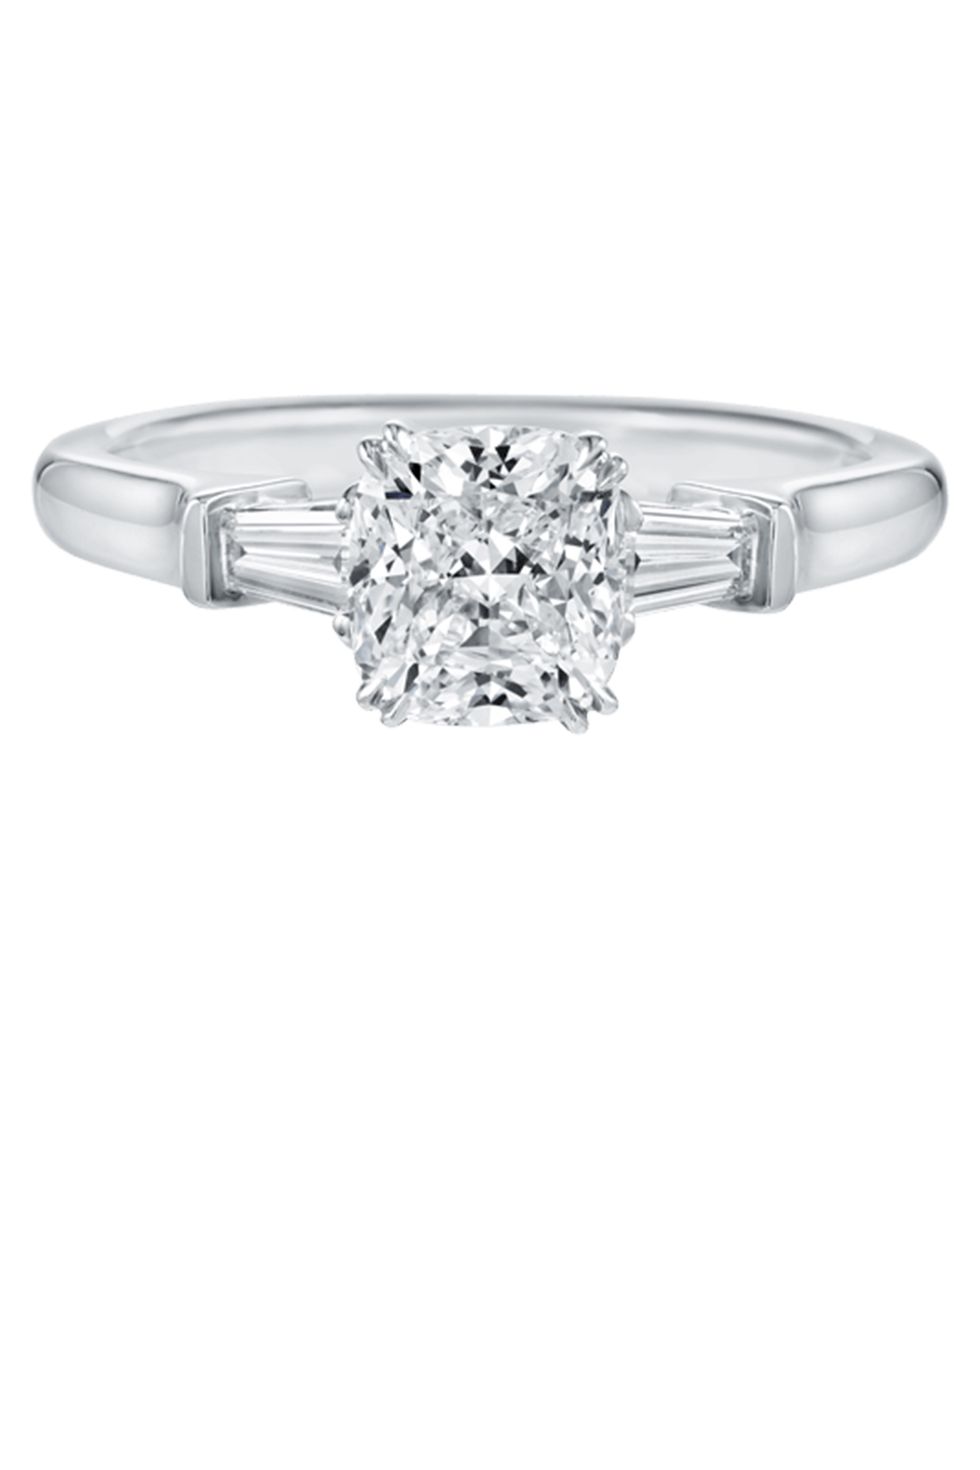 <p>Anello con diamante in platino, <strong data-redactor-tag="strong" data-verified="redactor">Harry Winston</strong>,&nbsp;<em data-redactor-tag="em" data-verified="redactor">harrywinston.com</em>.&nbsp;<span class="redactor-invisible-space" data-verified="redactor" data-redactor-tag="span" data-redactor-class="redactor-invisible-space"></span></p>